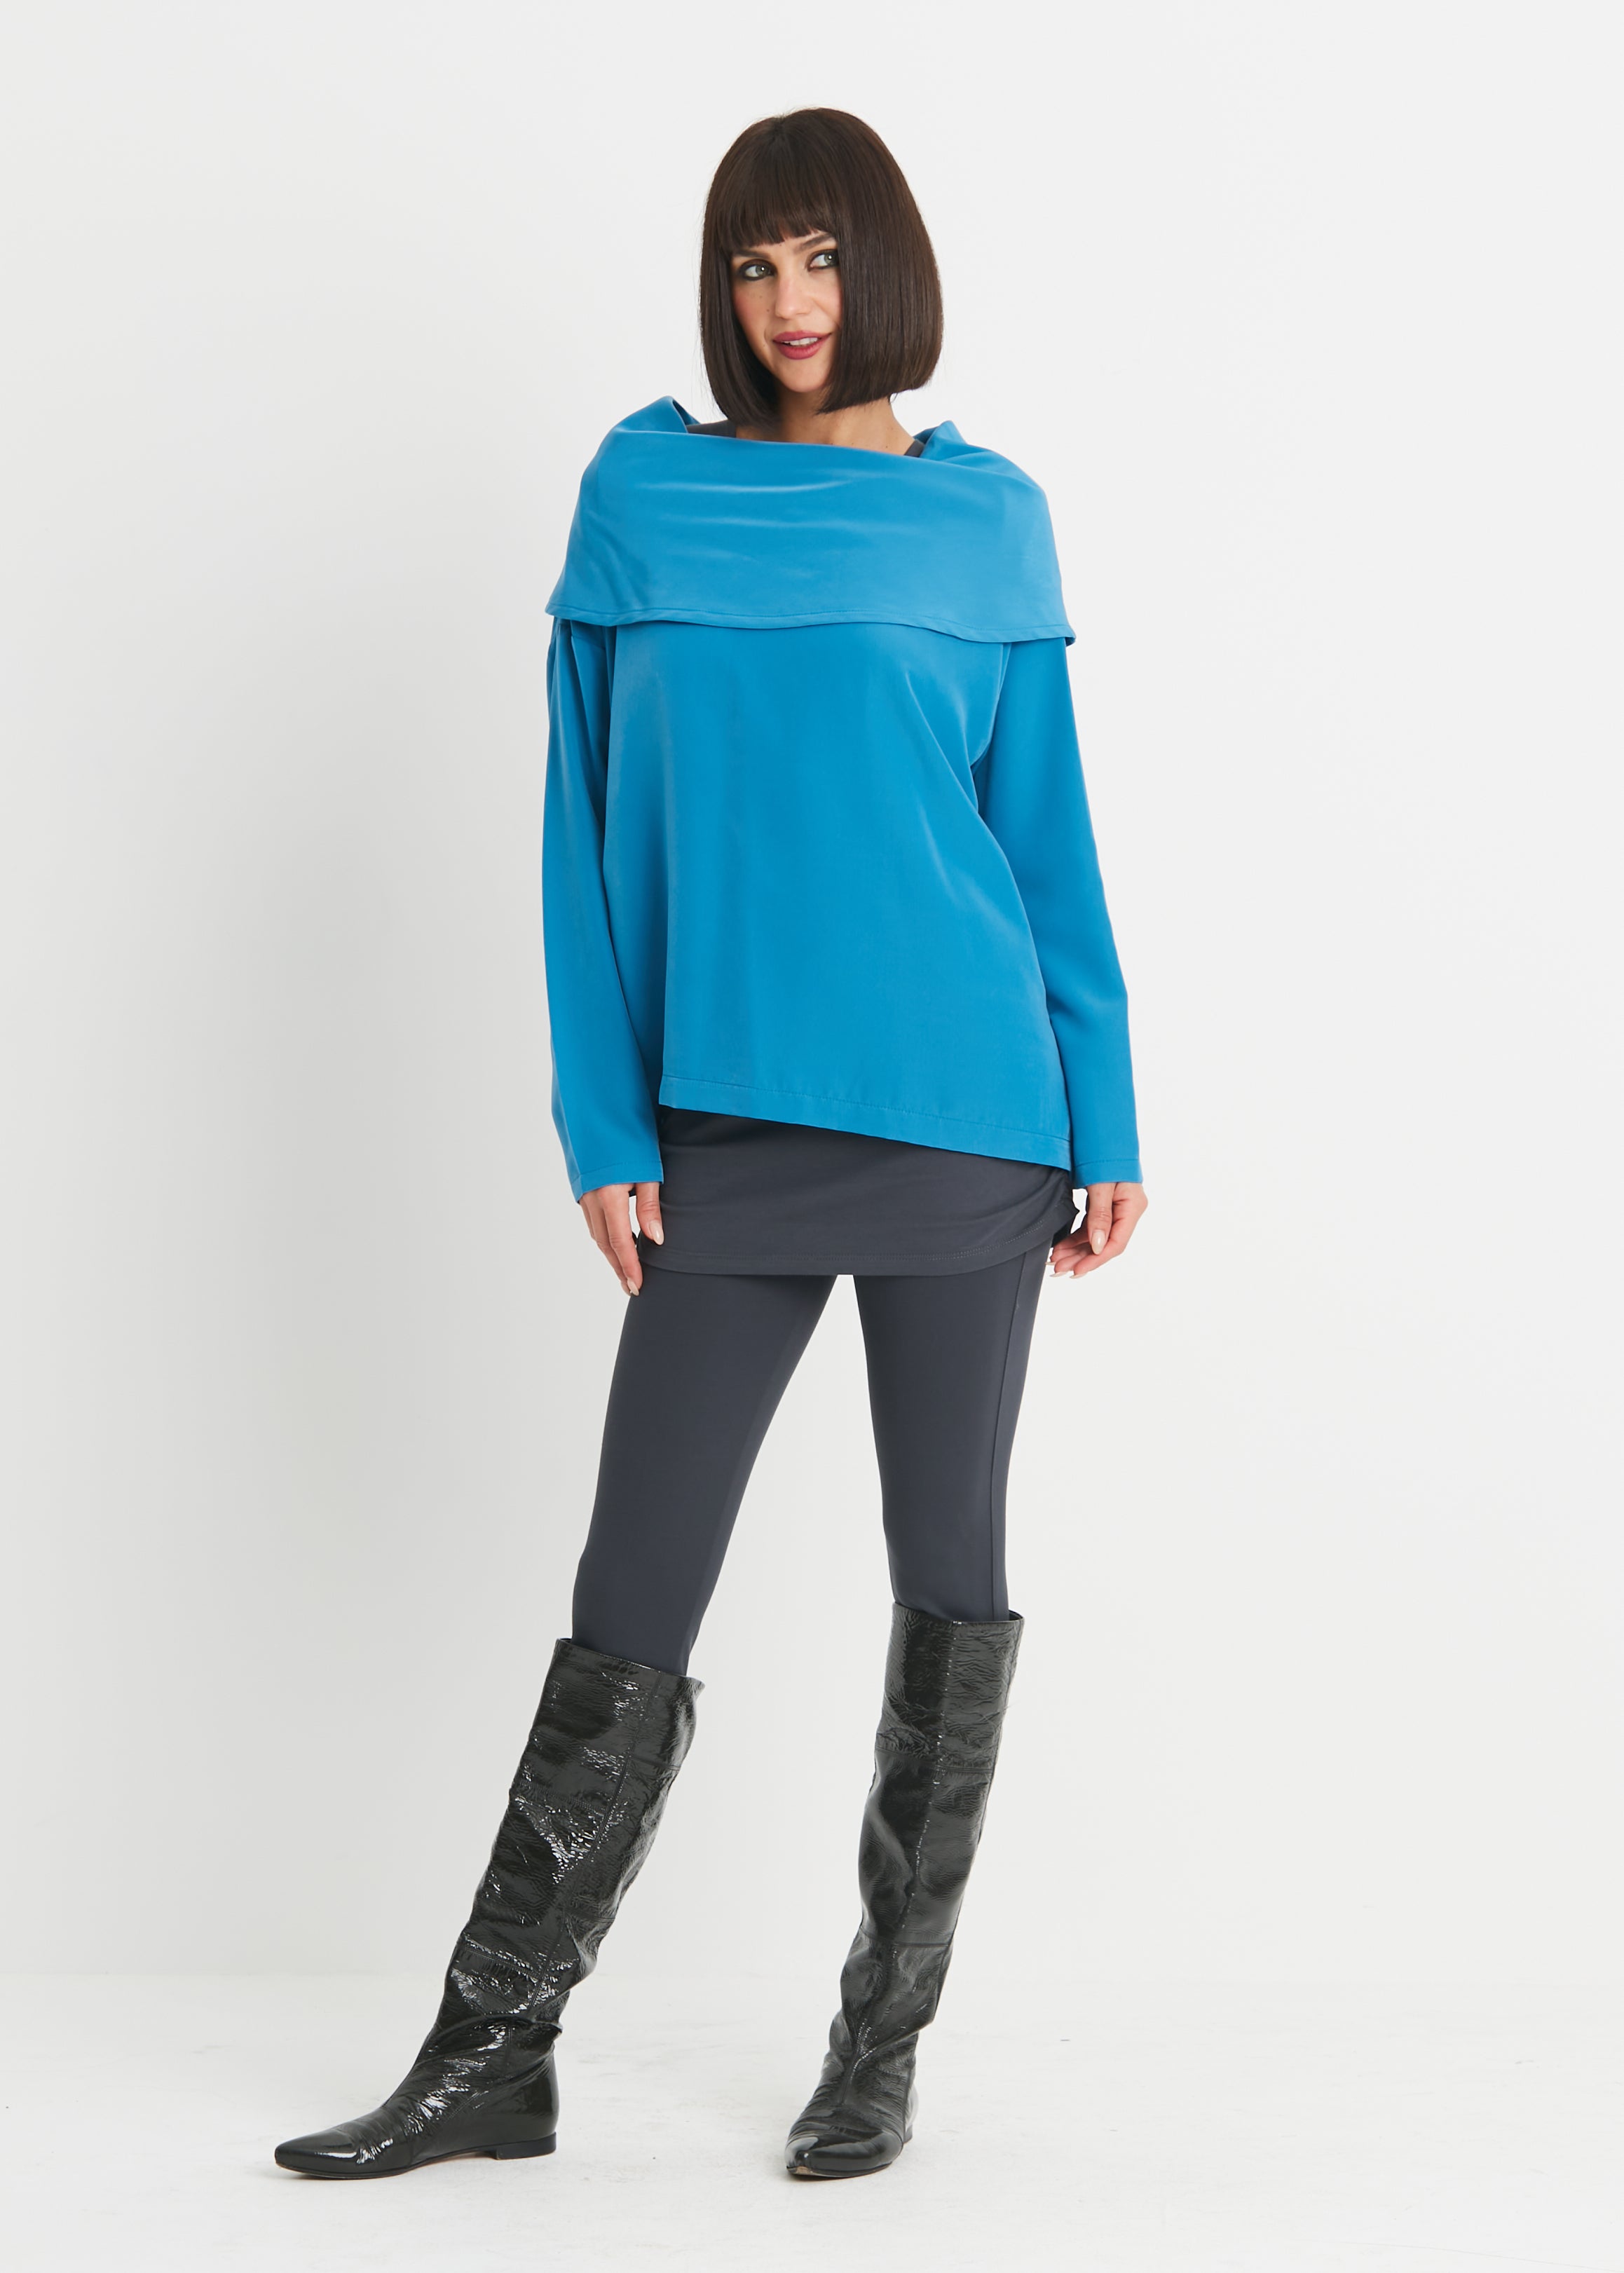 Stylish cowl neck blouse available in black or lake colors.Women's clothing Long Island, Woodbury, Greenvale, New York. High-end women's fashion Long Island Designer clothing Woodbury NY Luxury women's clothing Greenvale Fashion boutiques on Long Island Women's designer fashion stores Woodbury NY fashion boutiques